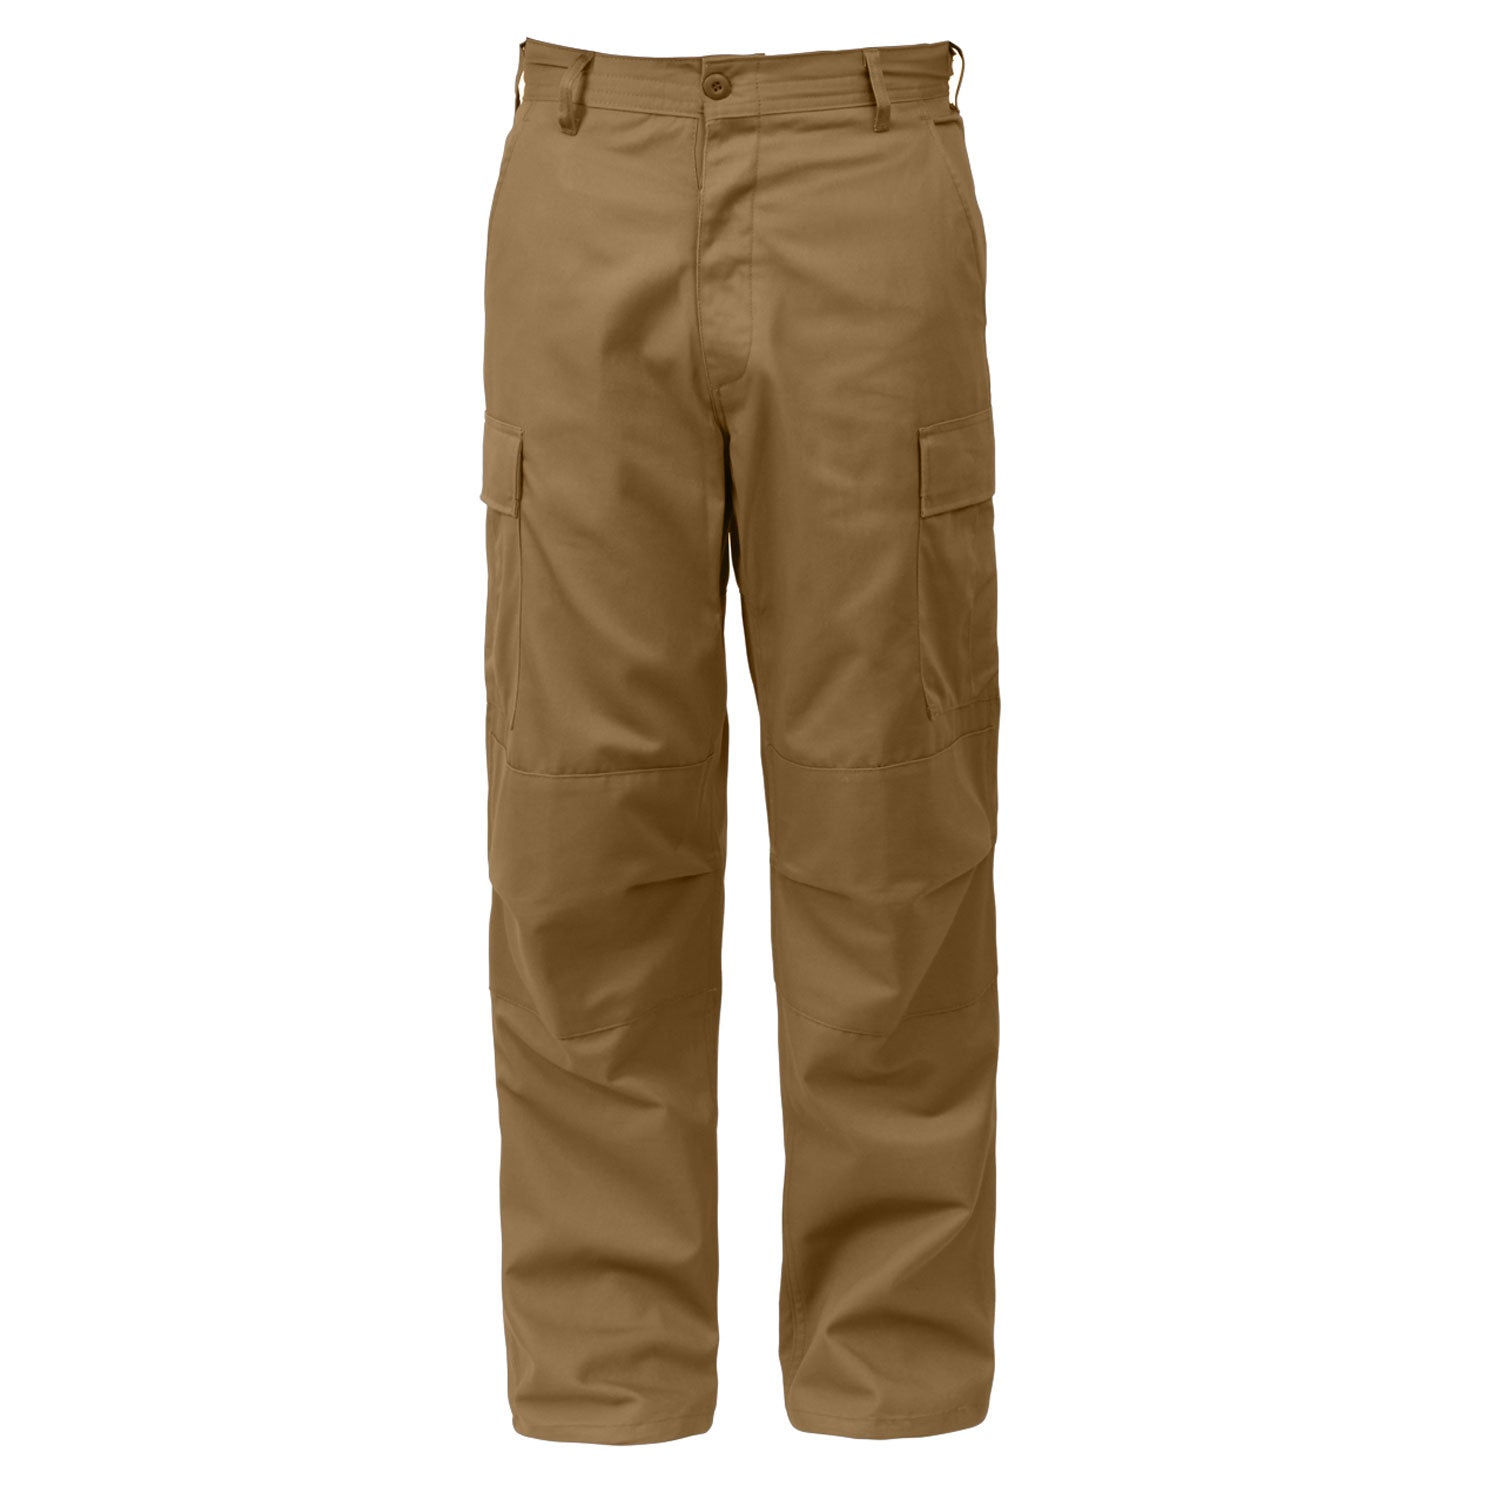 [Relaxed Fit Zipper Fly] Poly/Cotton Tactical BDU Pants Coyote Brown